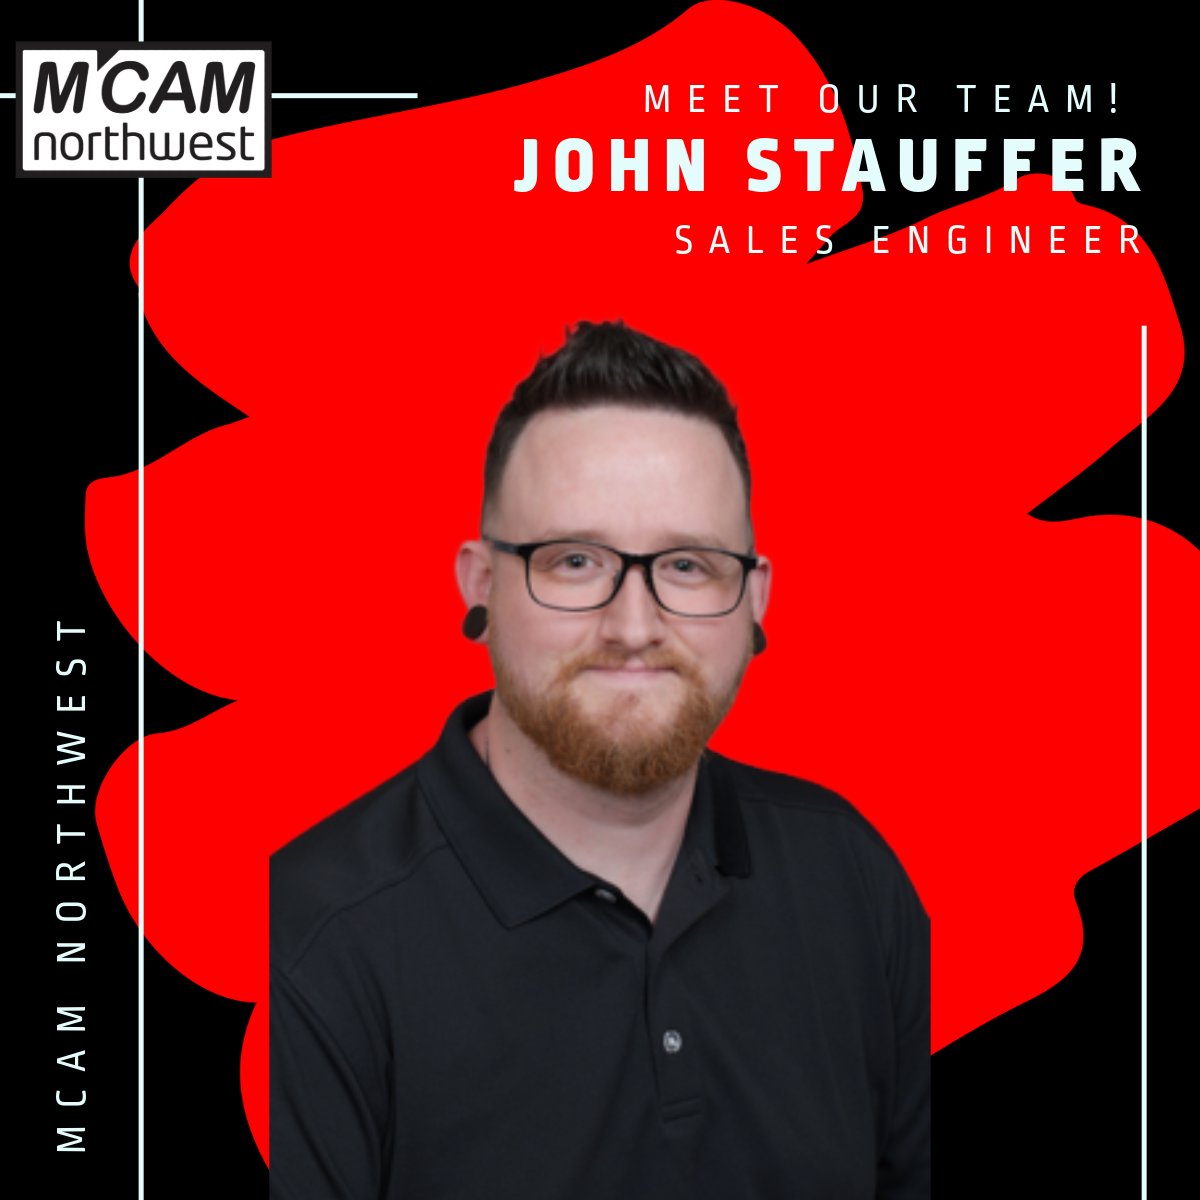 You might know John as one of the shining stars of our #Mastercam support team, but we are thrilled to announce that he is now a member of our sales team!

Say hi to John and sign up for him to come visit your shop! zfrmz.com/PQWEw4IgY5il4e…

#mcamnw #meettheteam #employeespotlight